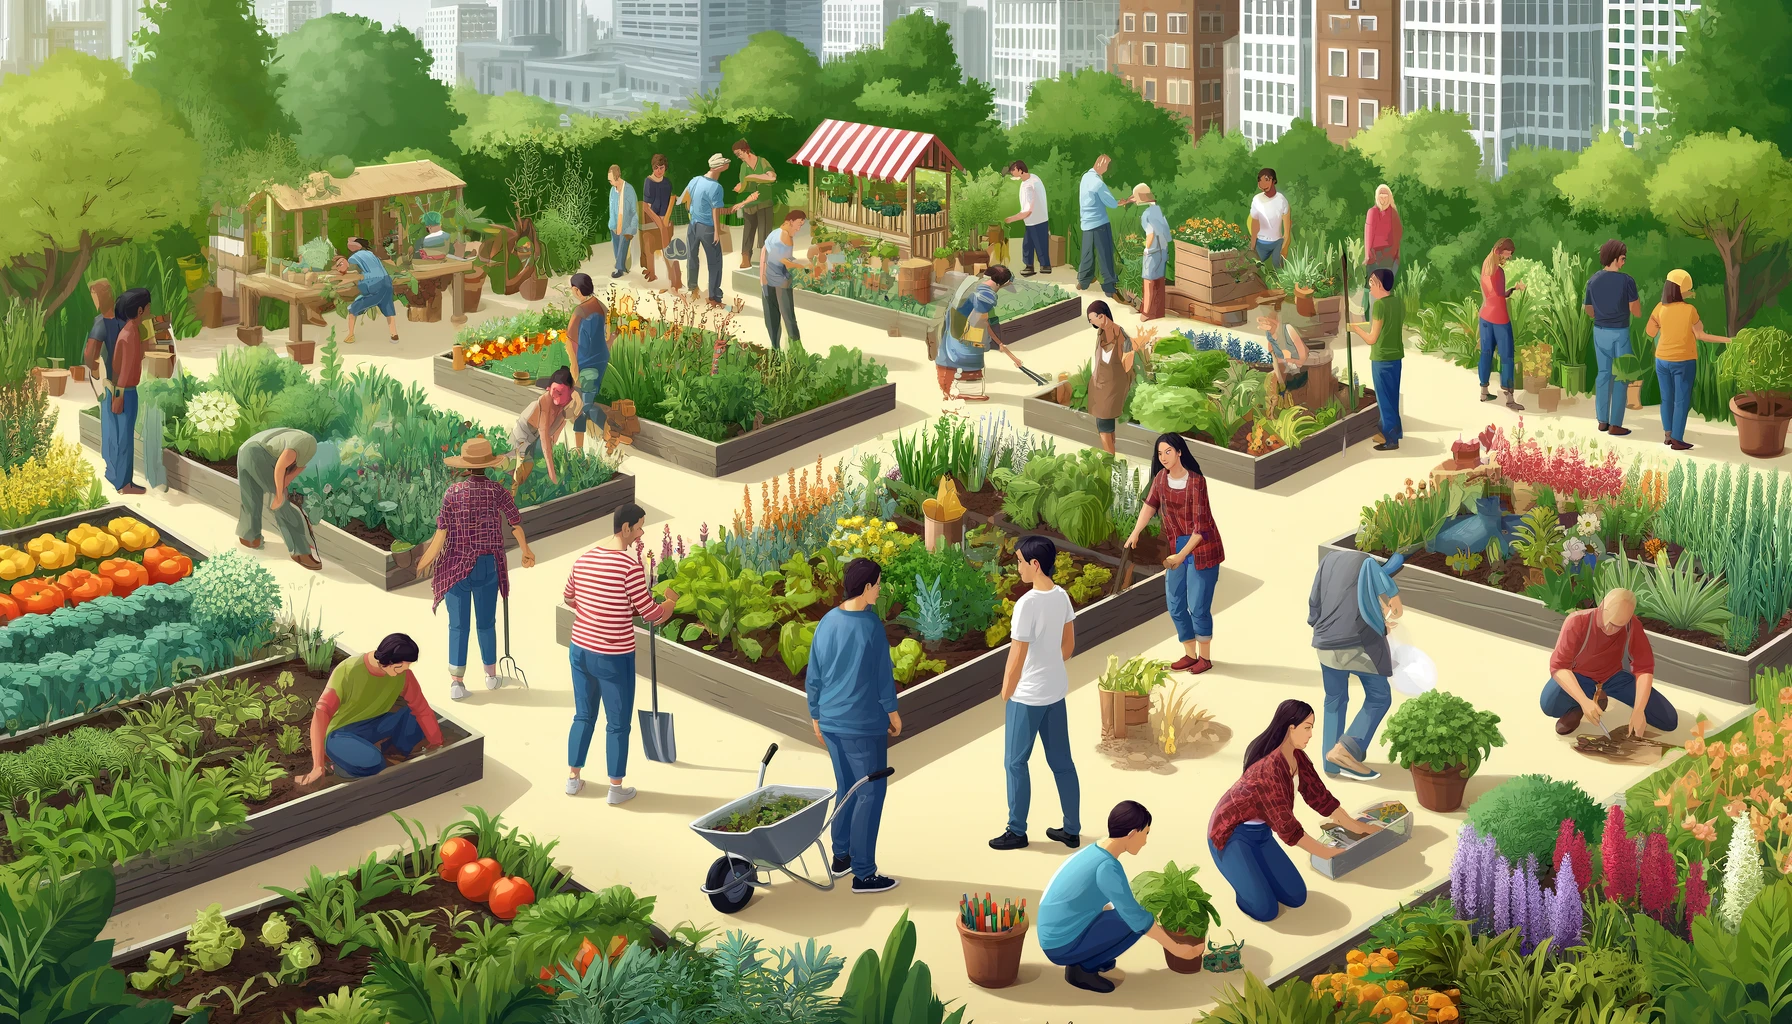 What is a Community Garden?